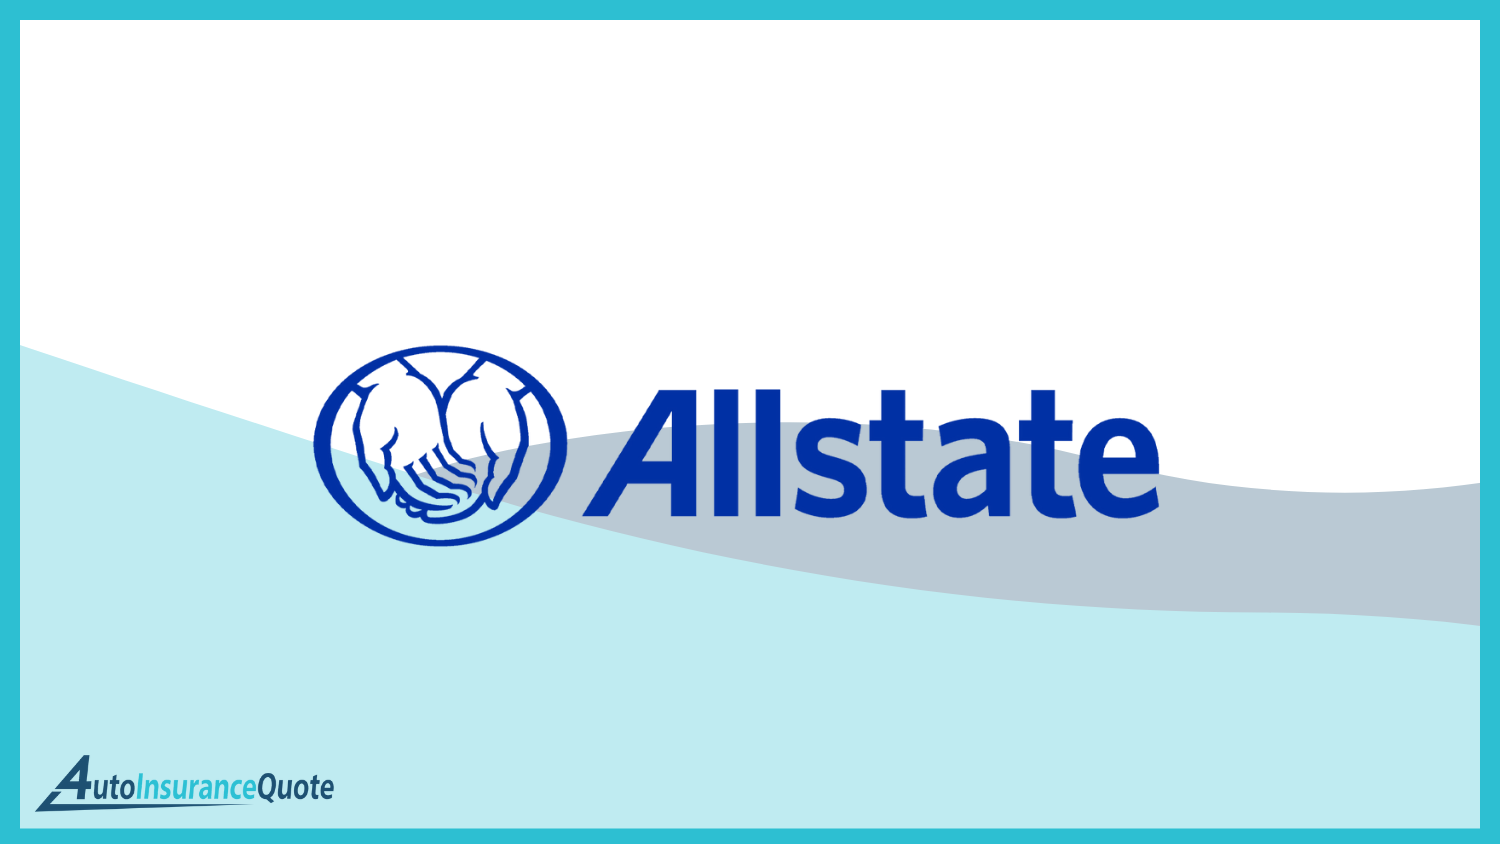 Allstate: Best Auto Insurance Companies That Don't Require Aftermarket Parts